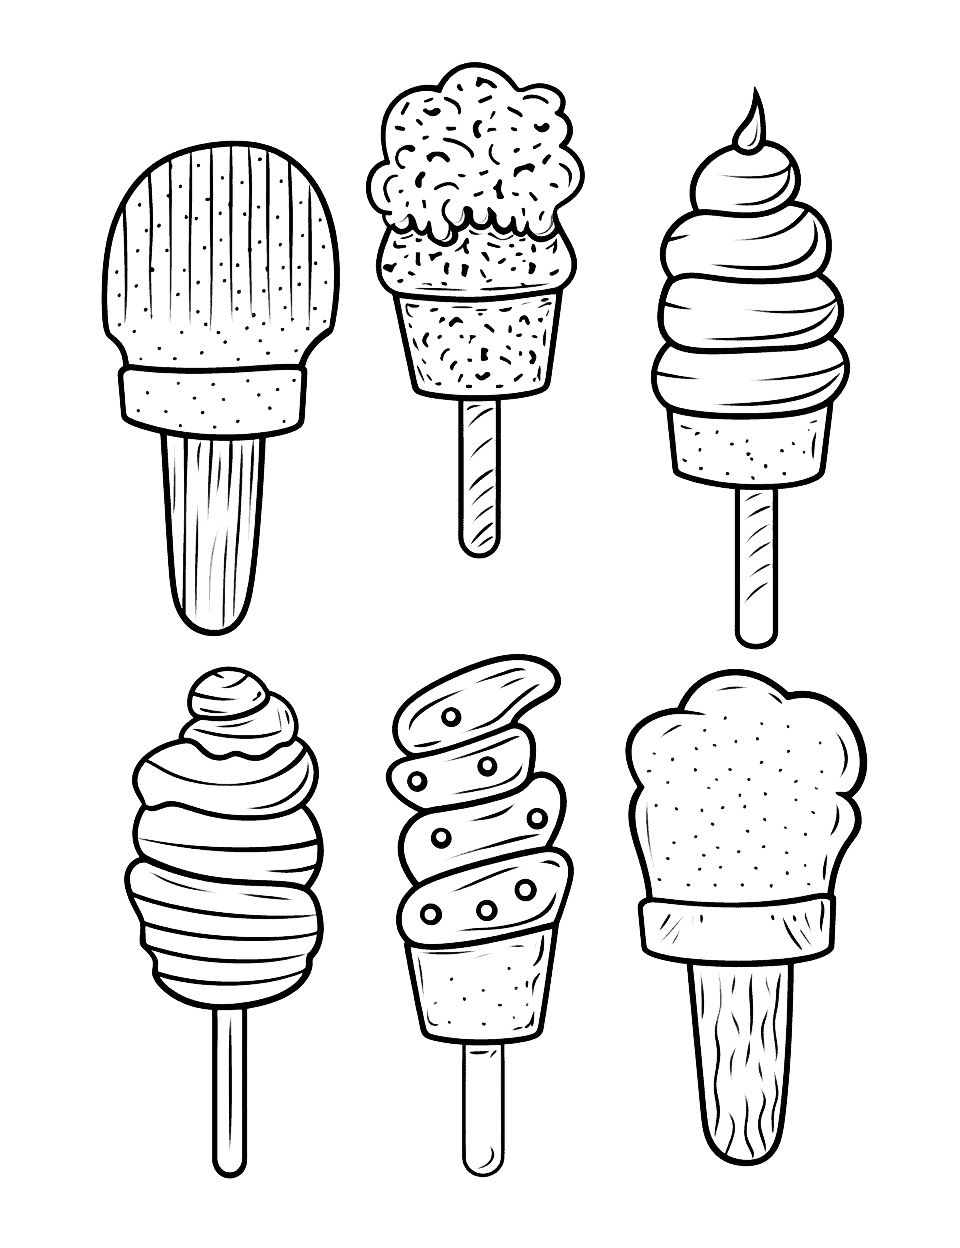 Frozen Popsicle Patterns Ice Cream Coloring Page - A variety of popsicle designs, each with a unique pattern.